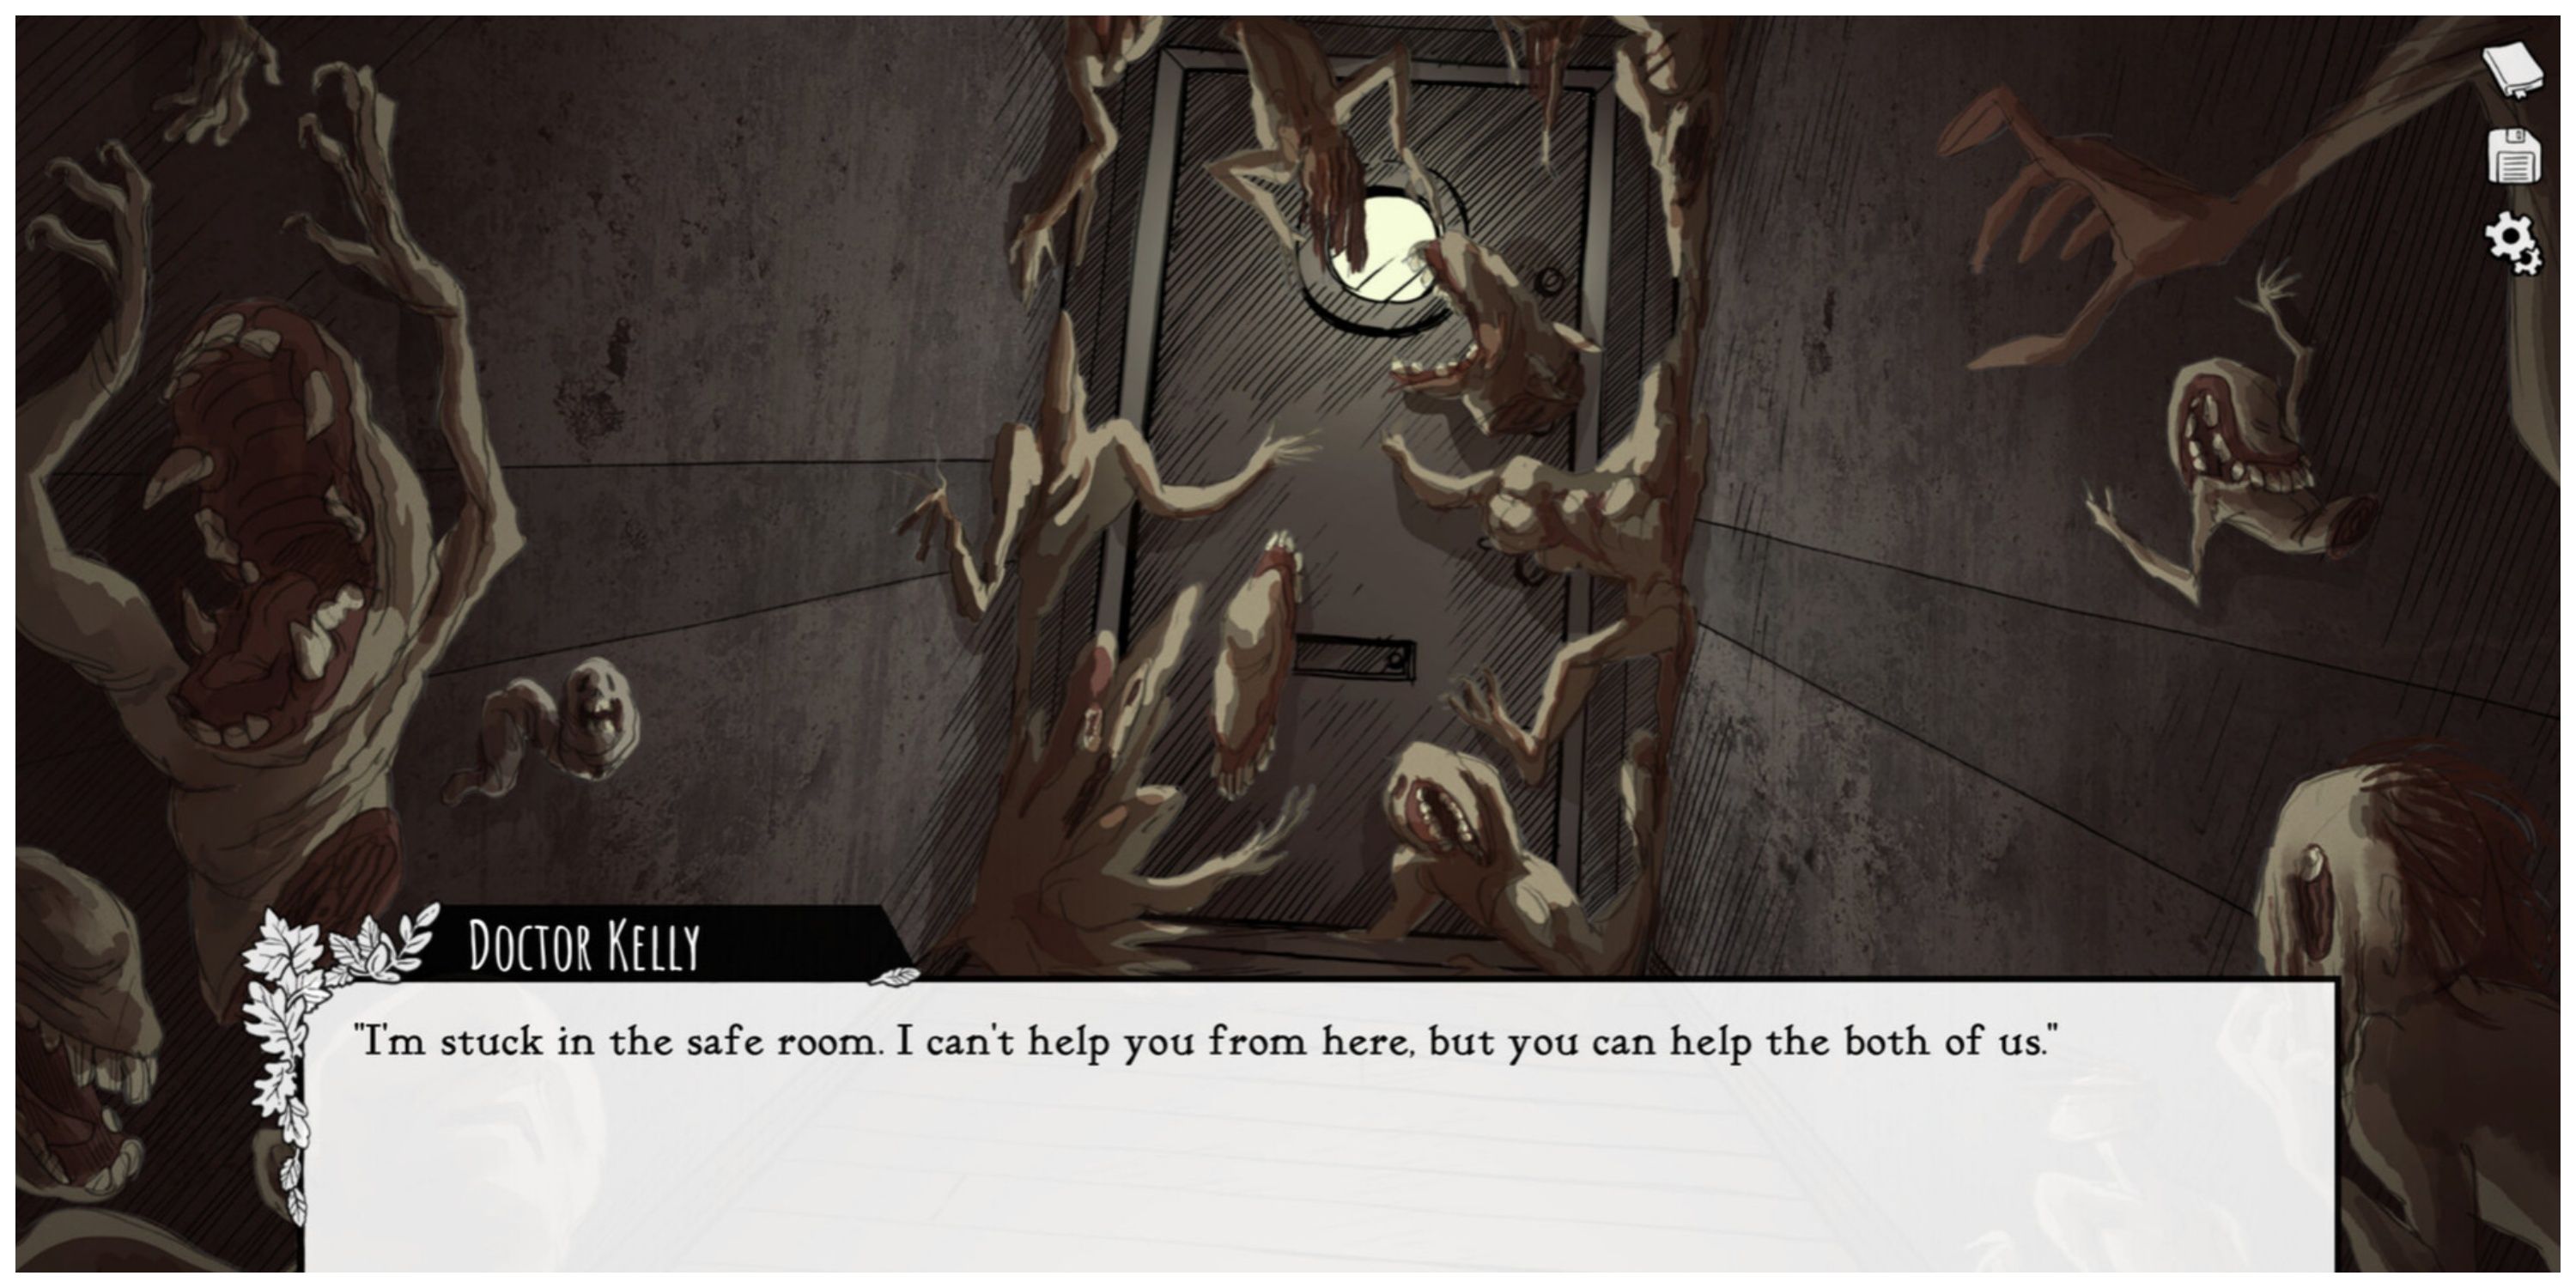 Scarlet Hollow - Dialogue Box In A Room Full Of Monsters